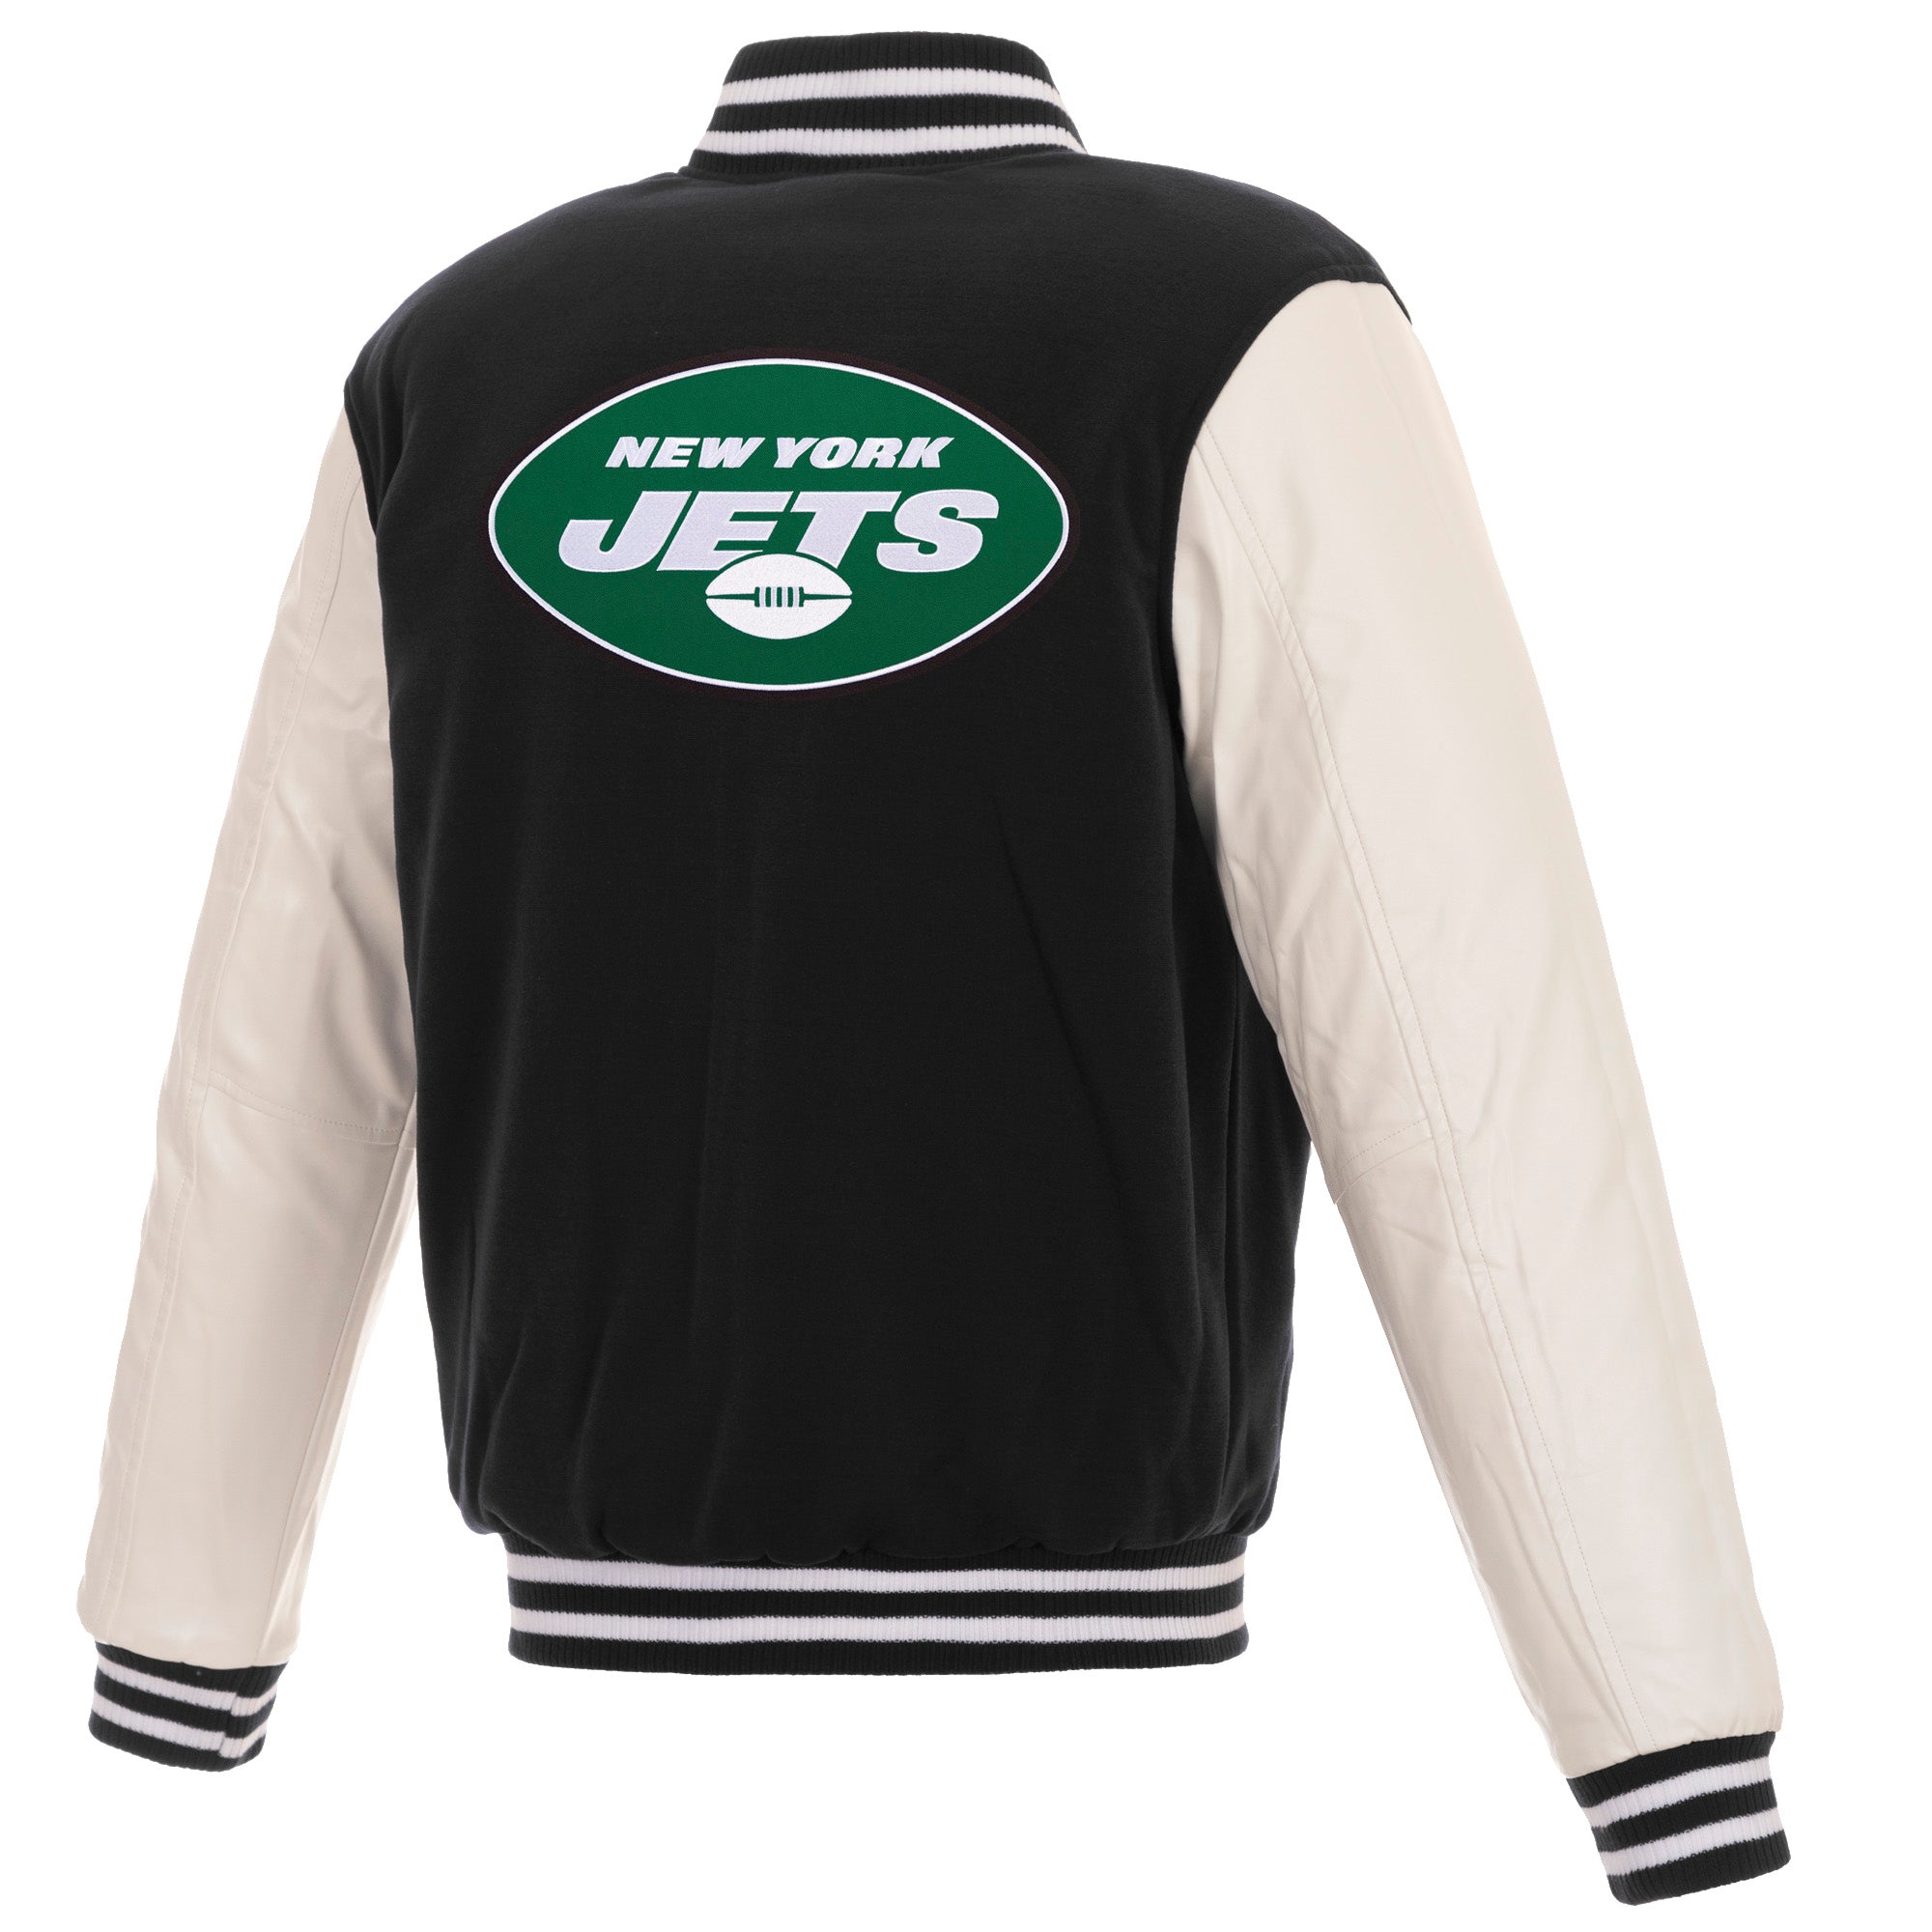 New York Jets - JH Design Reversible Fleece Jacket with Faux Leather Sleeves - Black/White 3X-Large